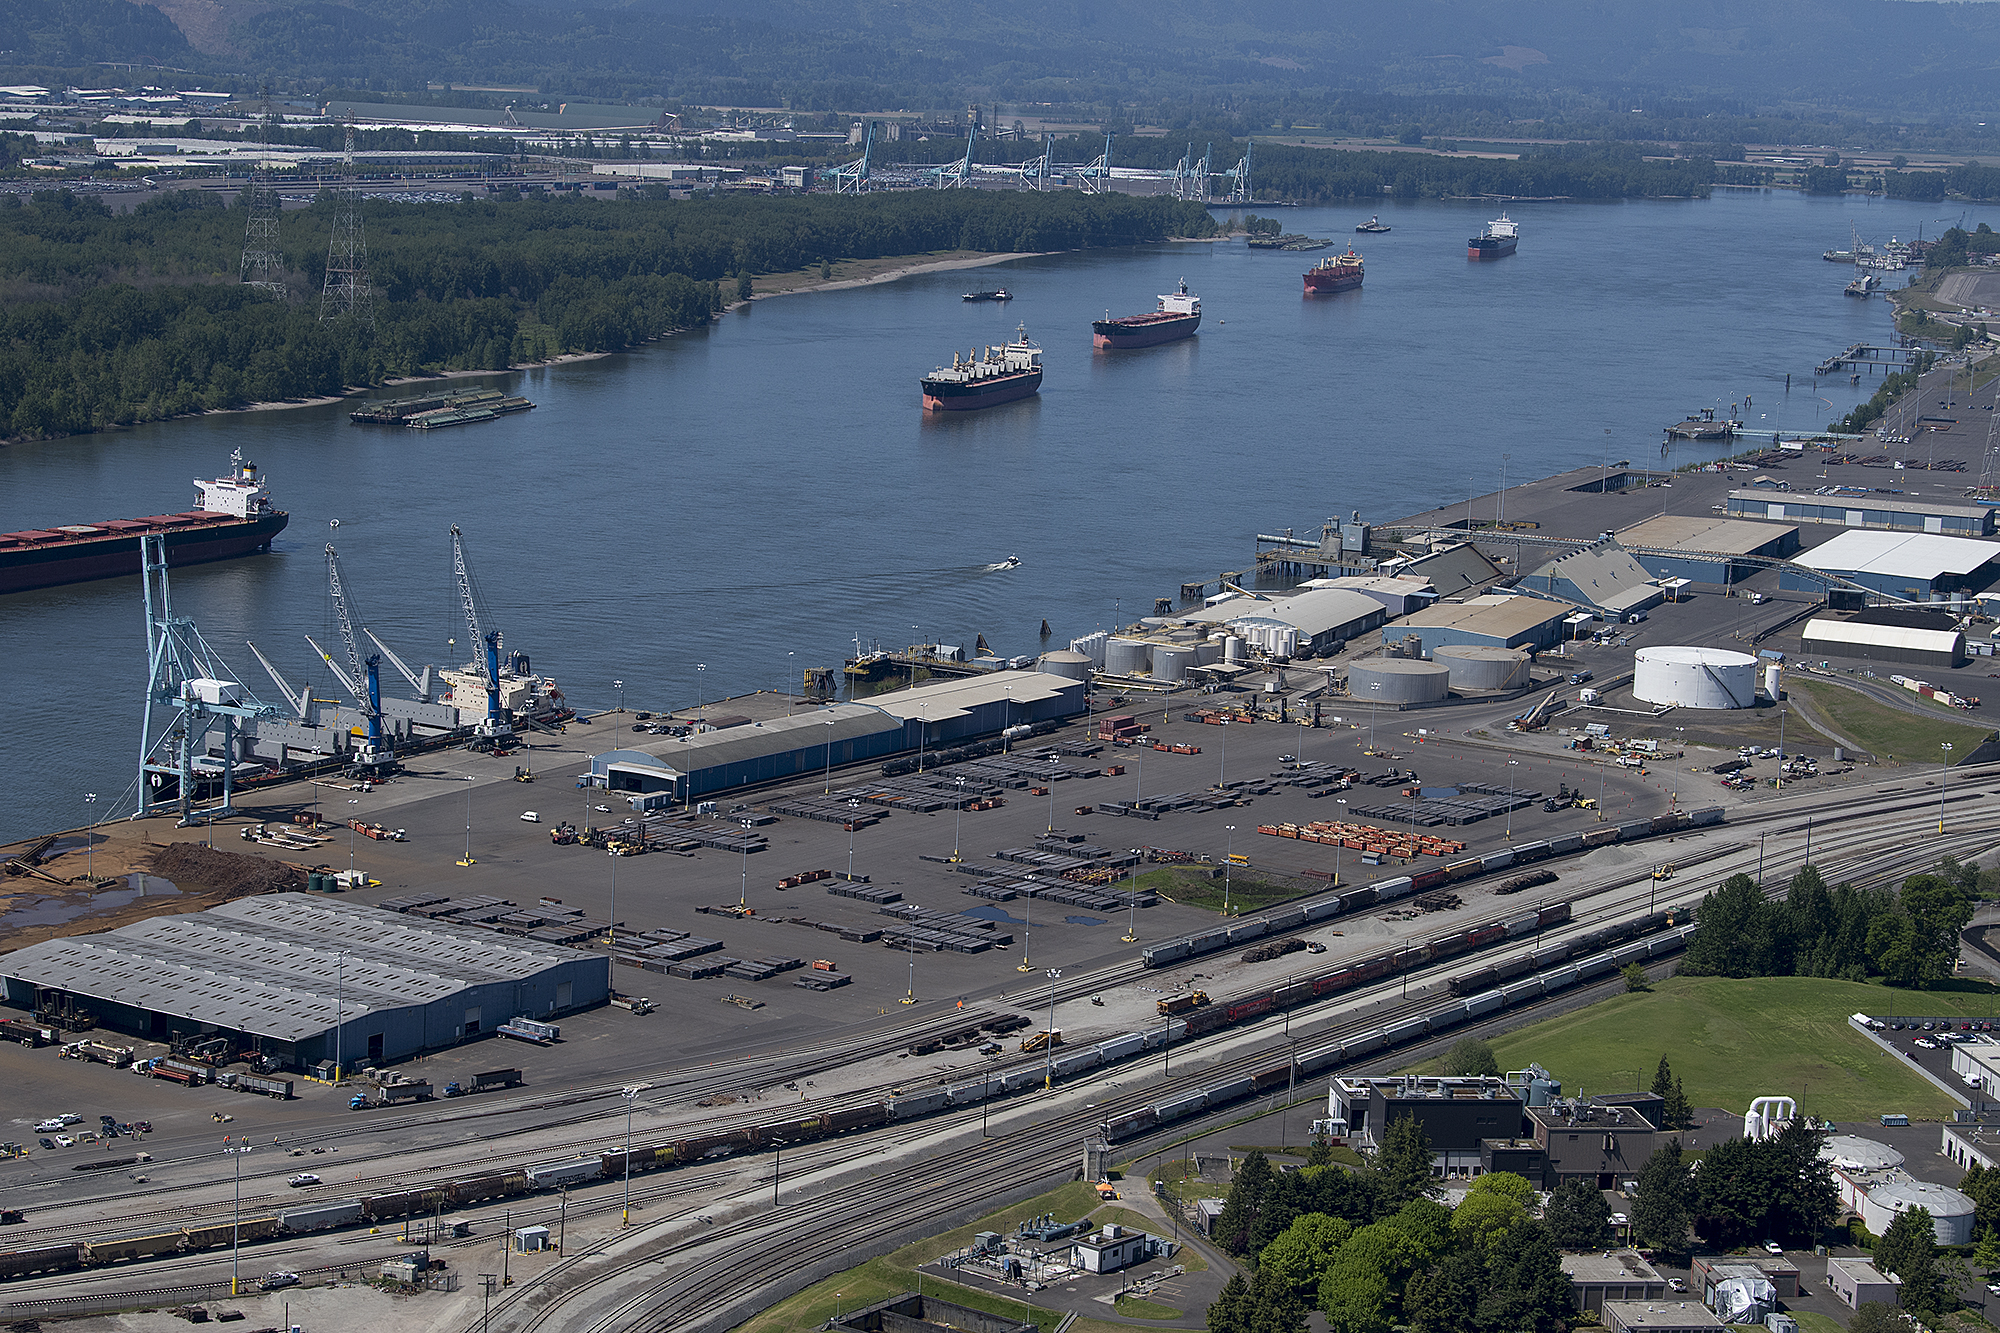 The Port of Vancouver will soon add soda ash to its list of bulk exports. The port announced Wednesday morning that Vancouver Bulk Terminal and Solvay are partnering to build a "world-class" soda ash shipping facility at Terminal 2.